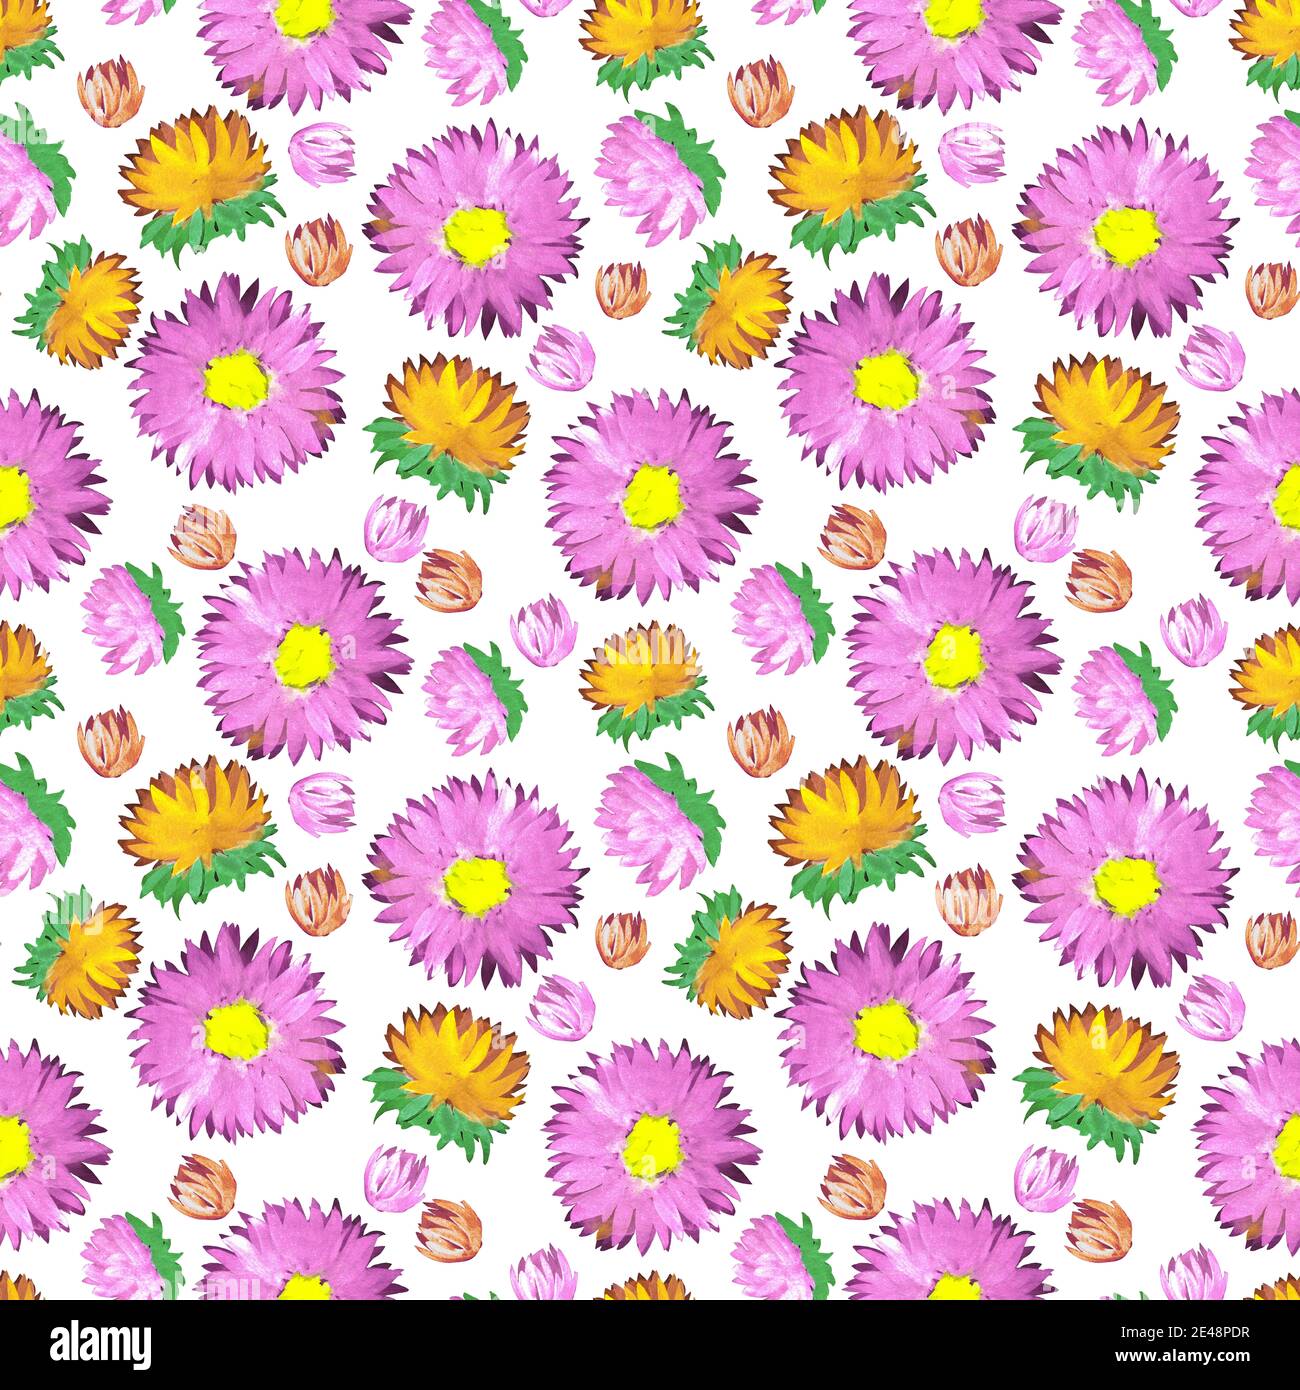 Pink aster bud watercolor seamless pattern Stock Photo